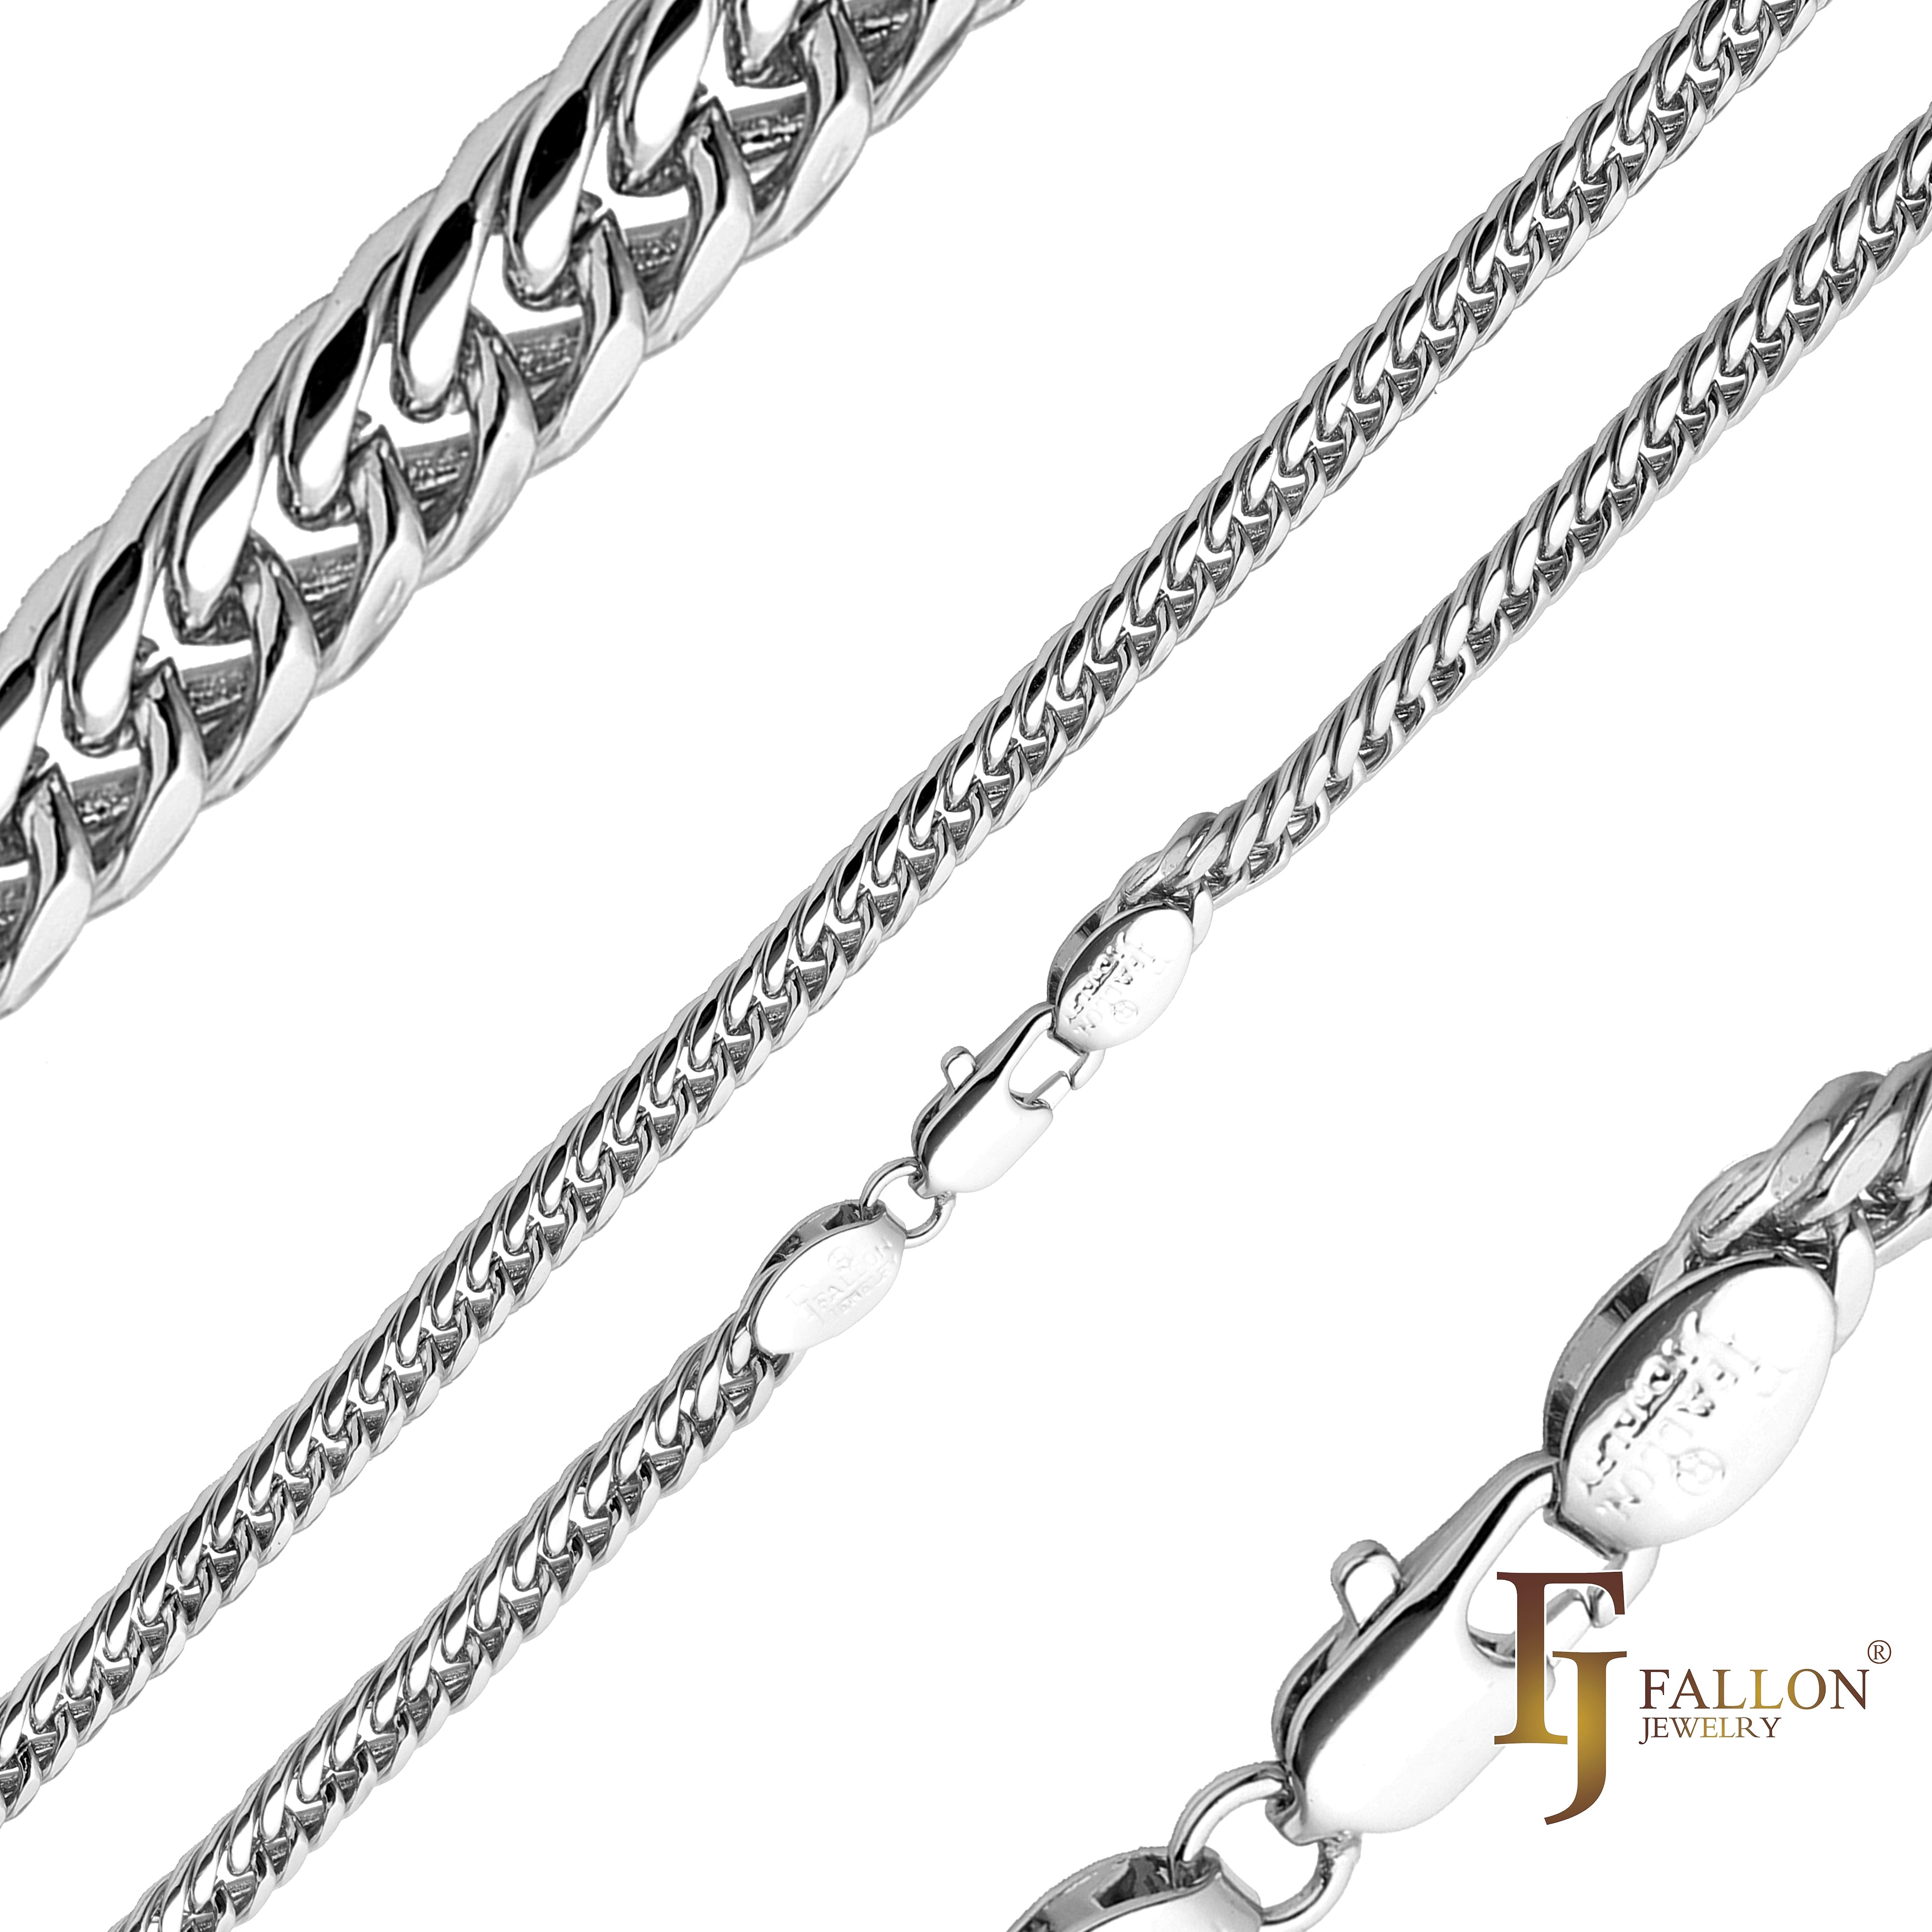 Cuban triple link chains plated in White Gold, 14K Gold, Rose Gold, 18K Gold